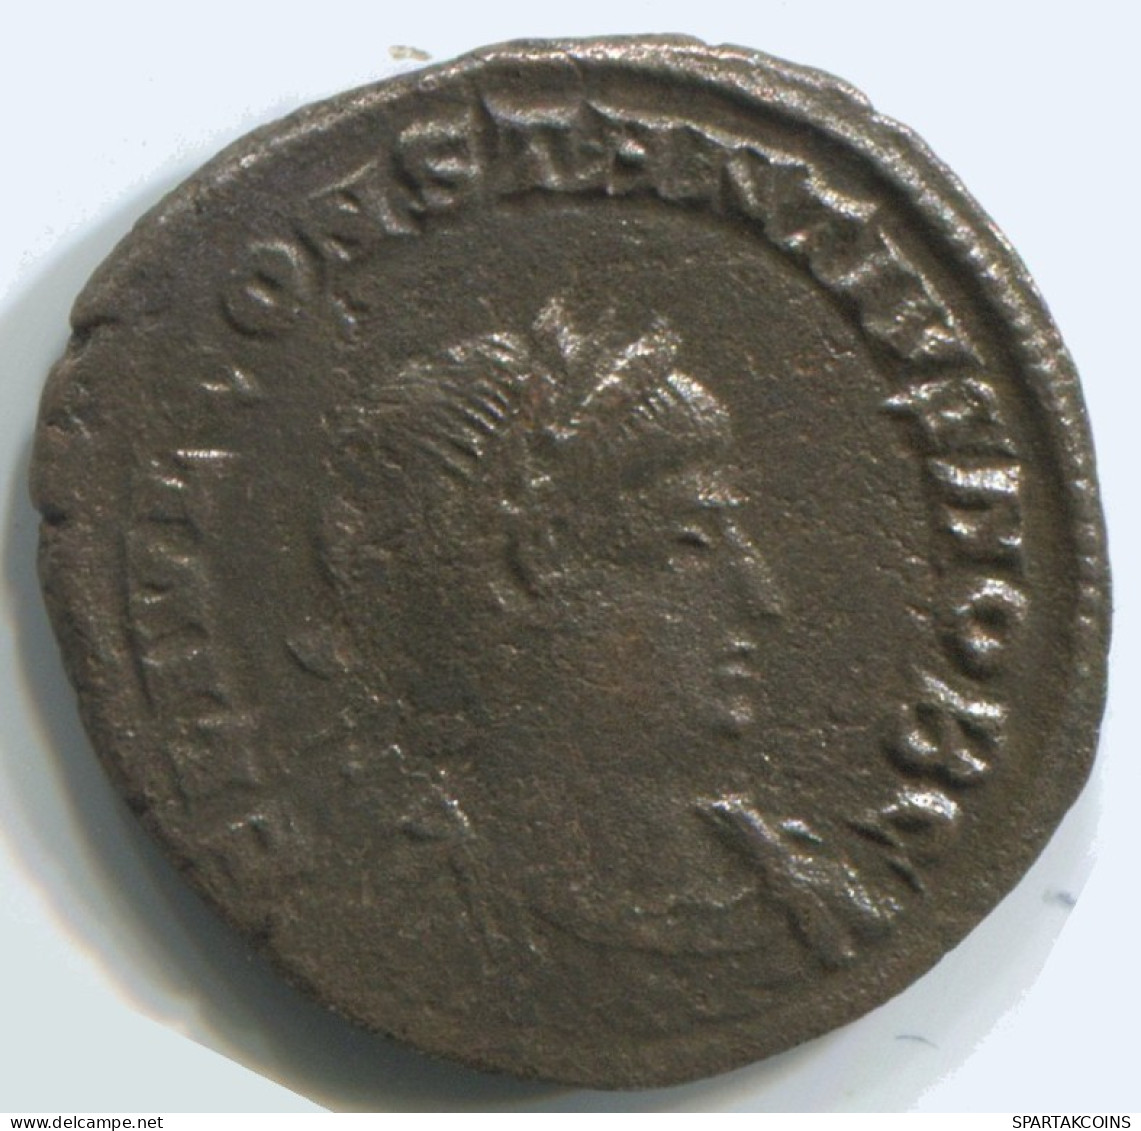 LATE ROMAN EMPIRE Pièce Antique Authentique Roman Pièce 1.9g/18mm #ANT2322.14.F.A - The End Of Empire (363 AD To 476 AD)